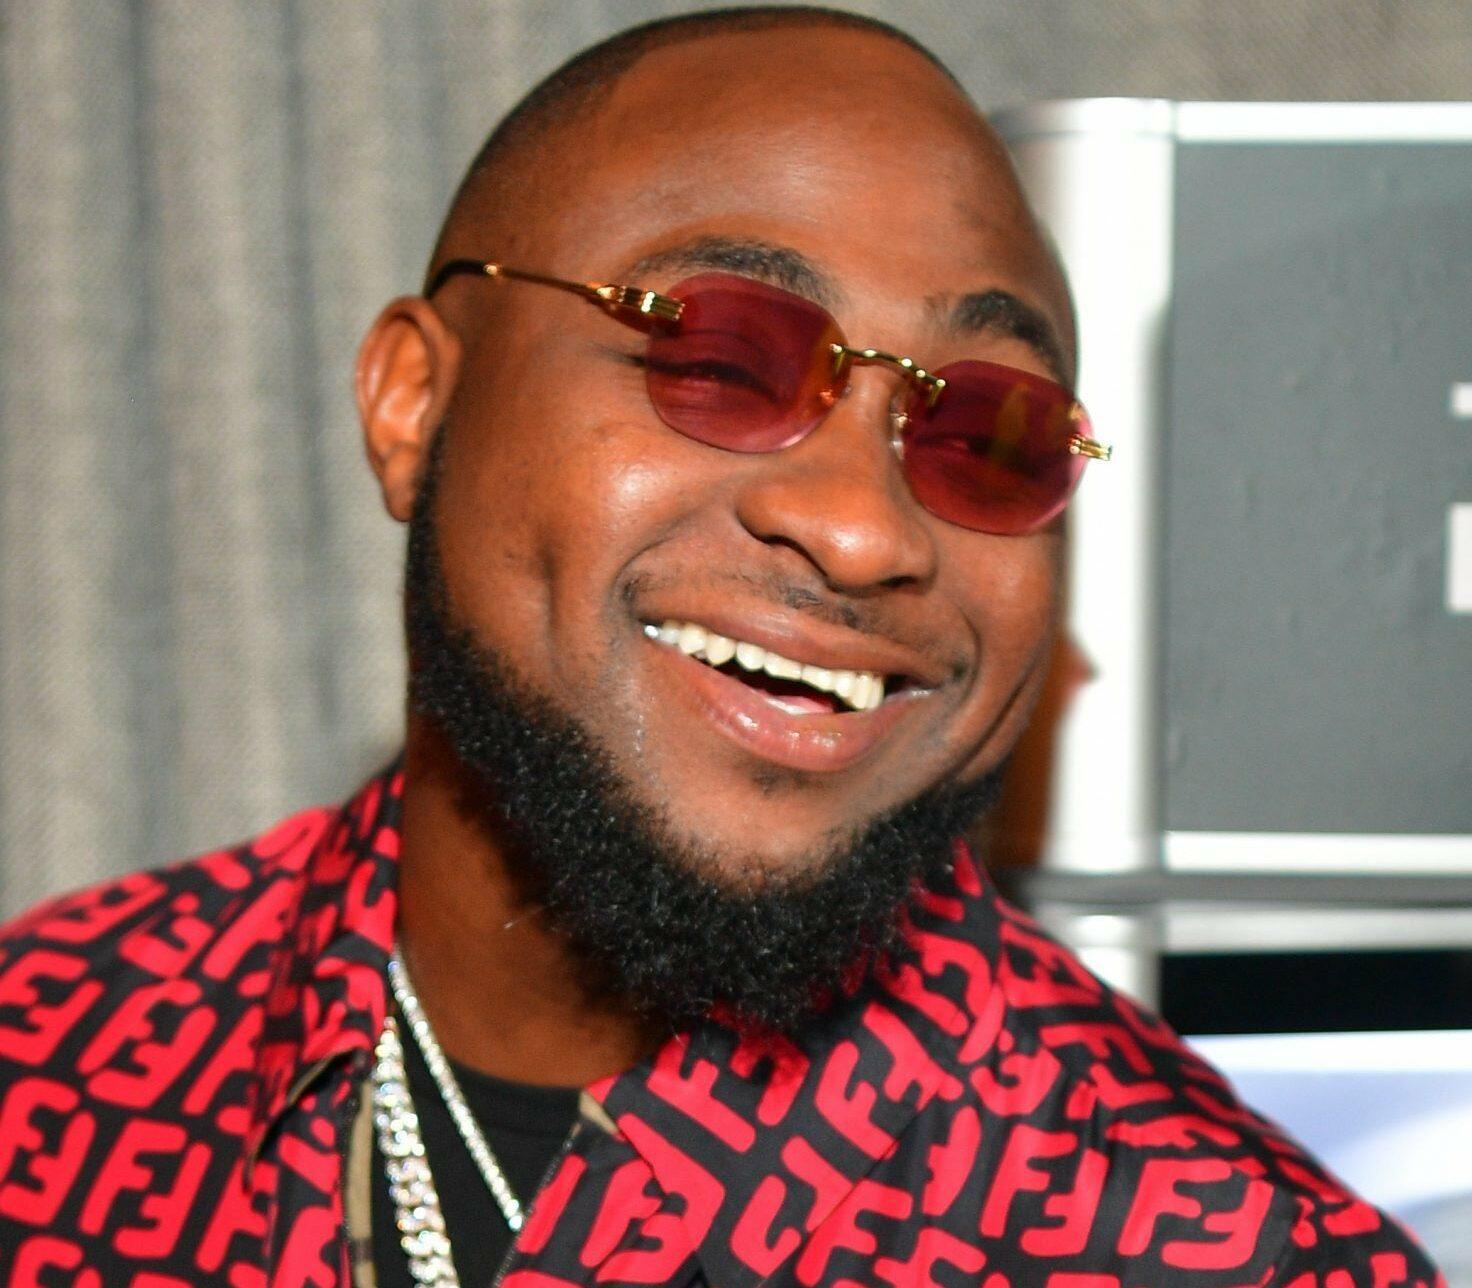 Singer Davido raises N151m in a day hours after posting account details